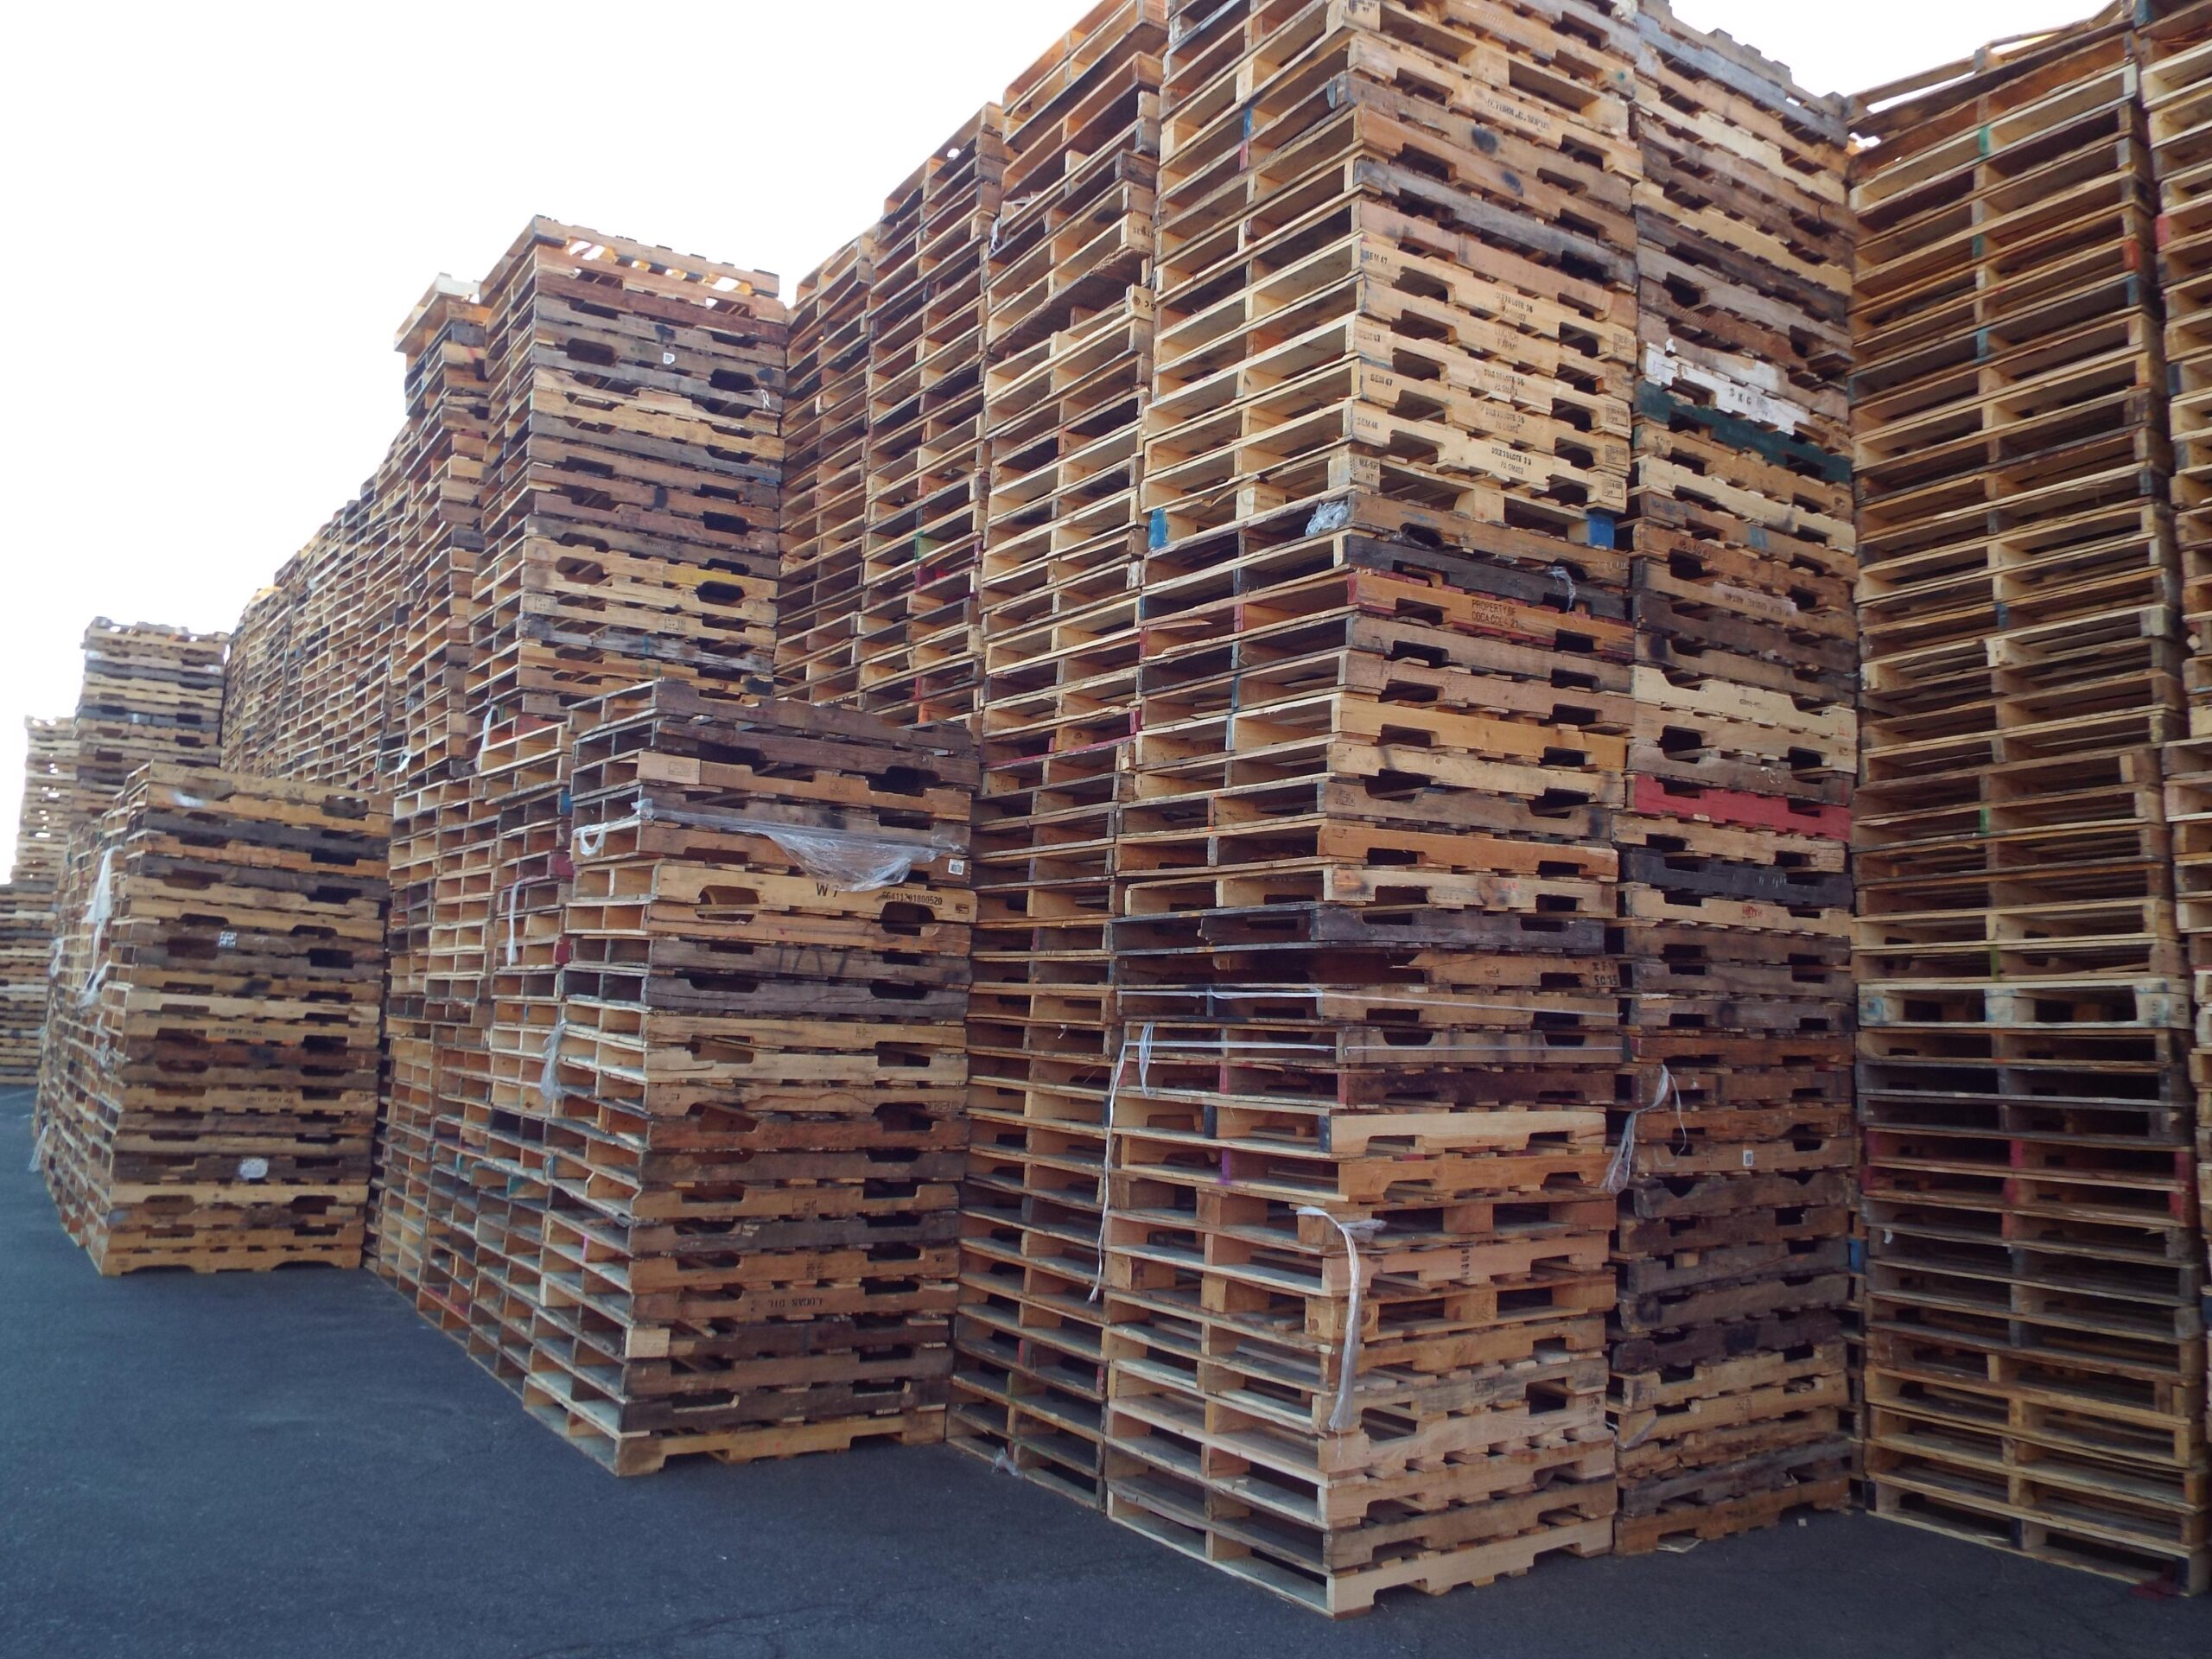 About Us - Sustain - Recycled pallets